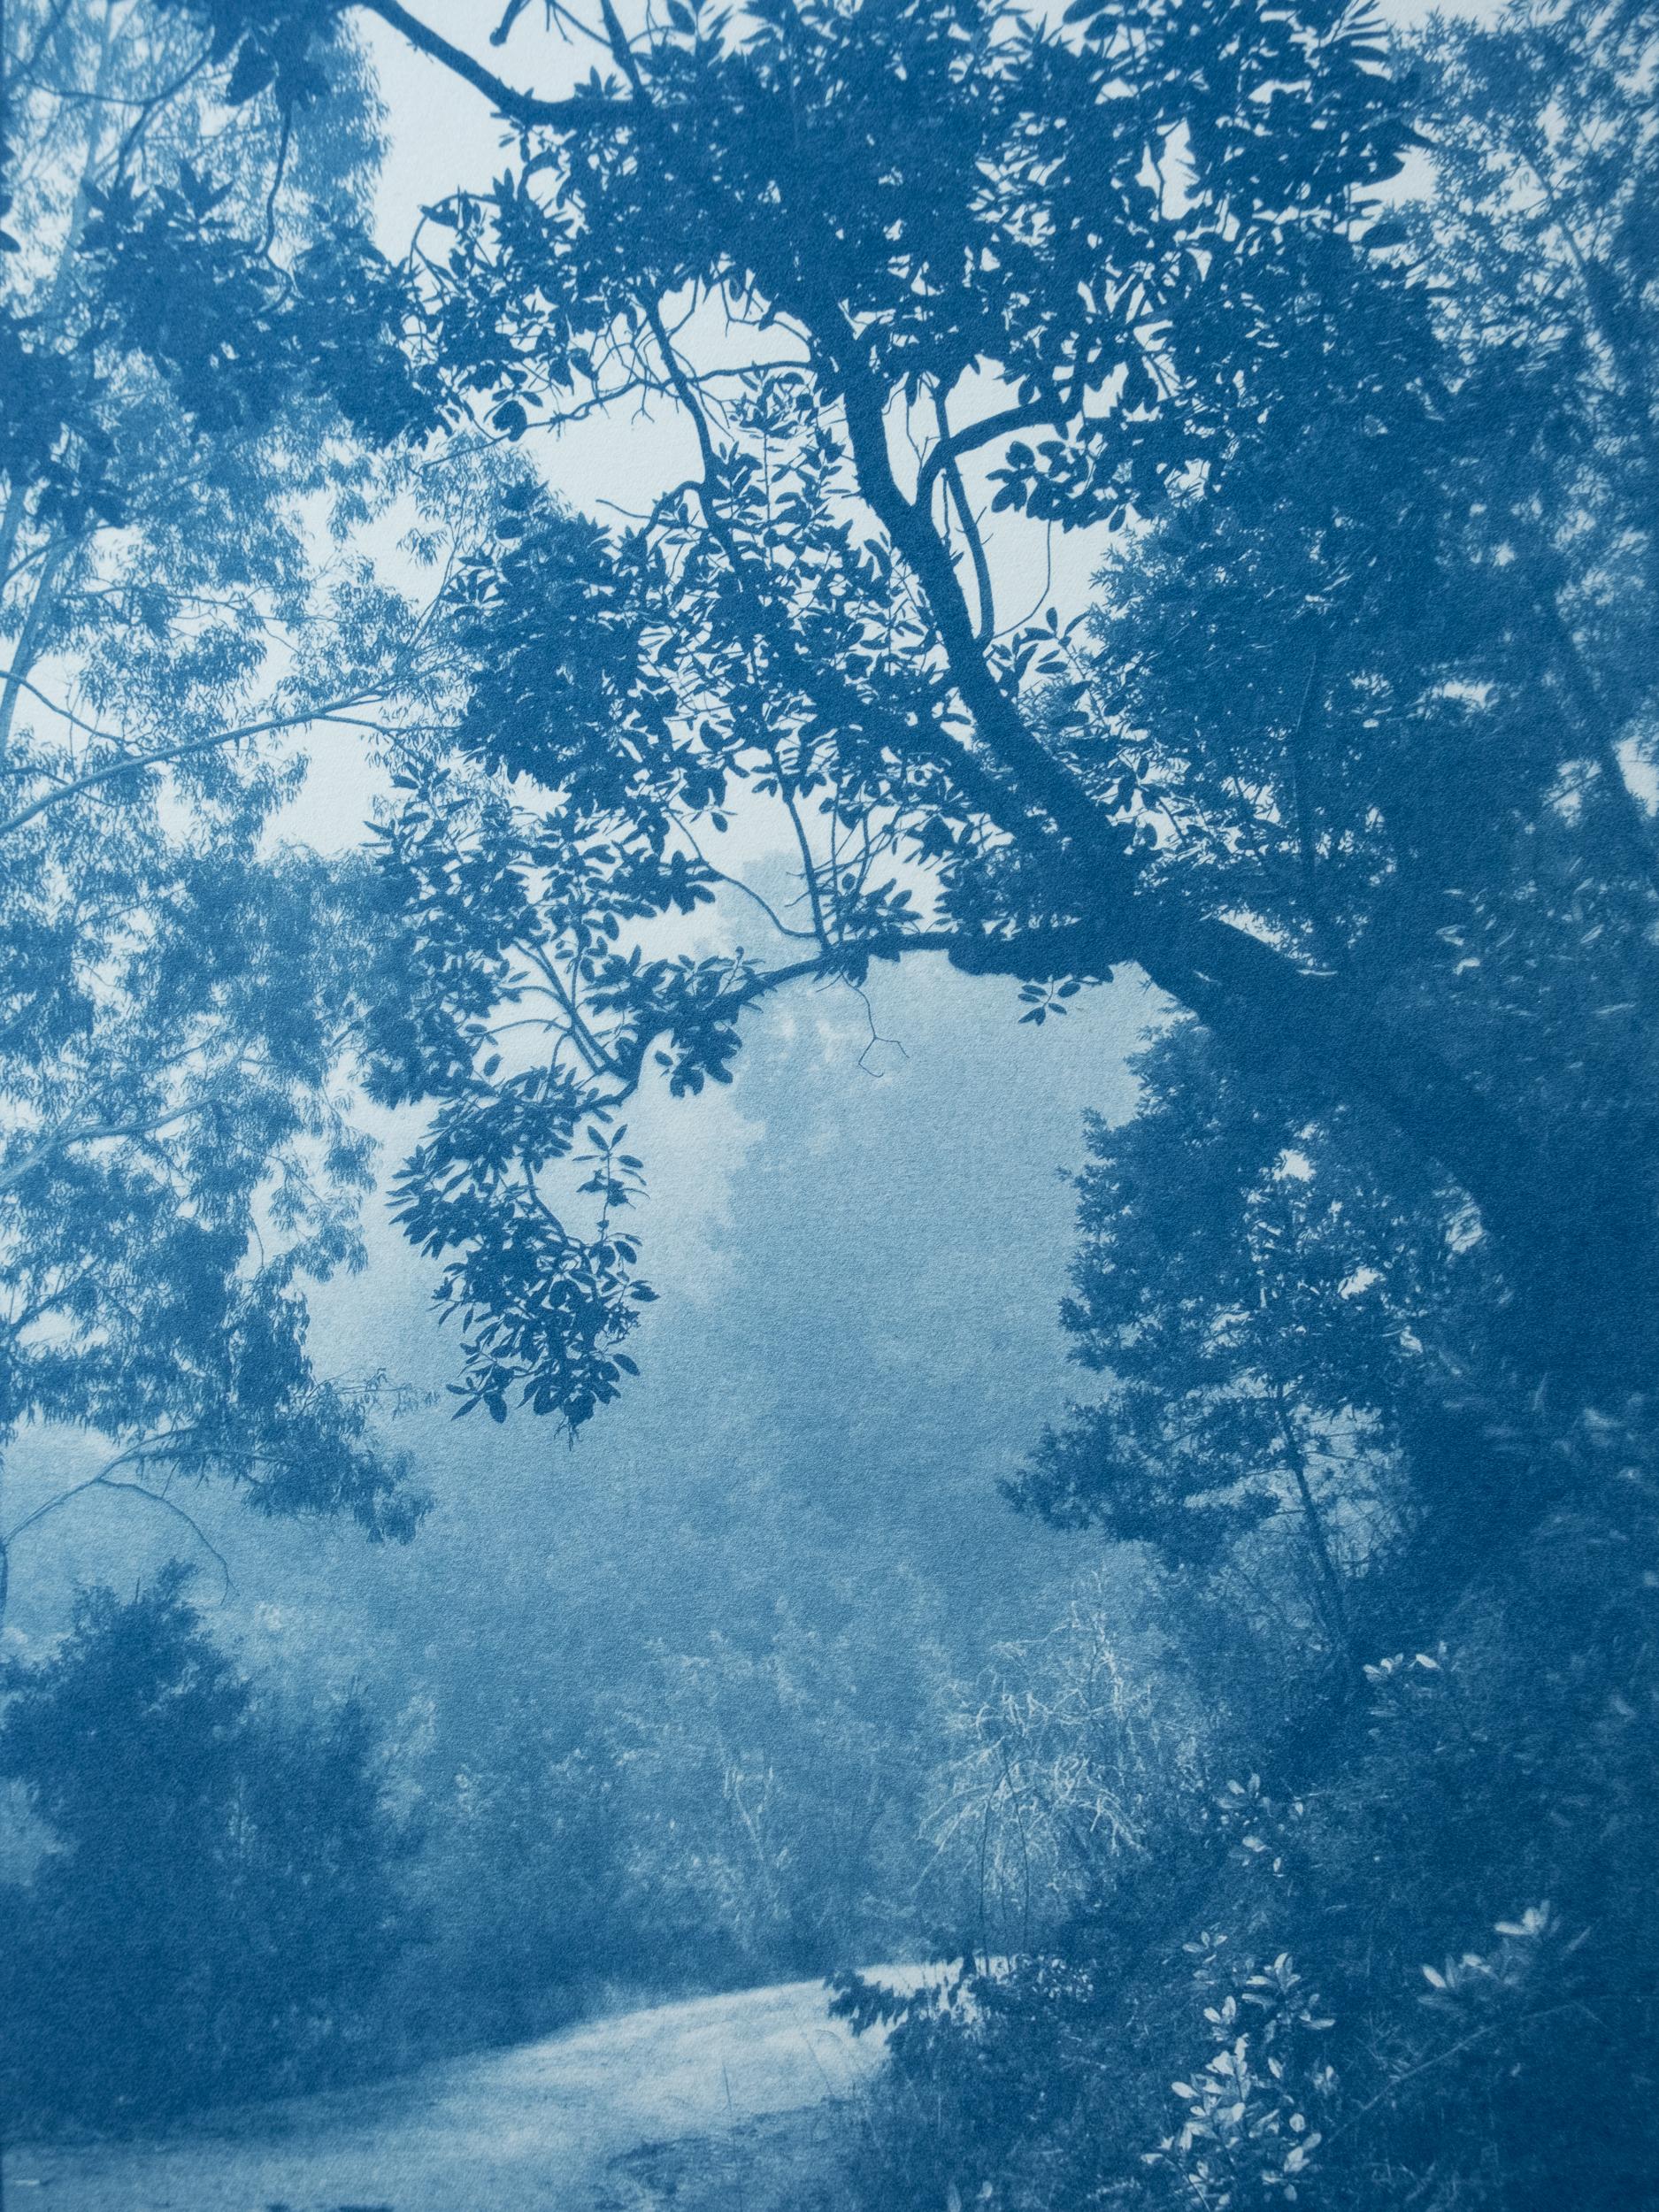 Madrone Tree  (hand-printed cyanotype, 24 x 18 inches)